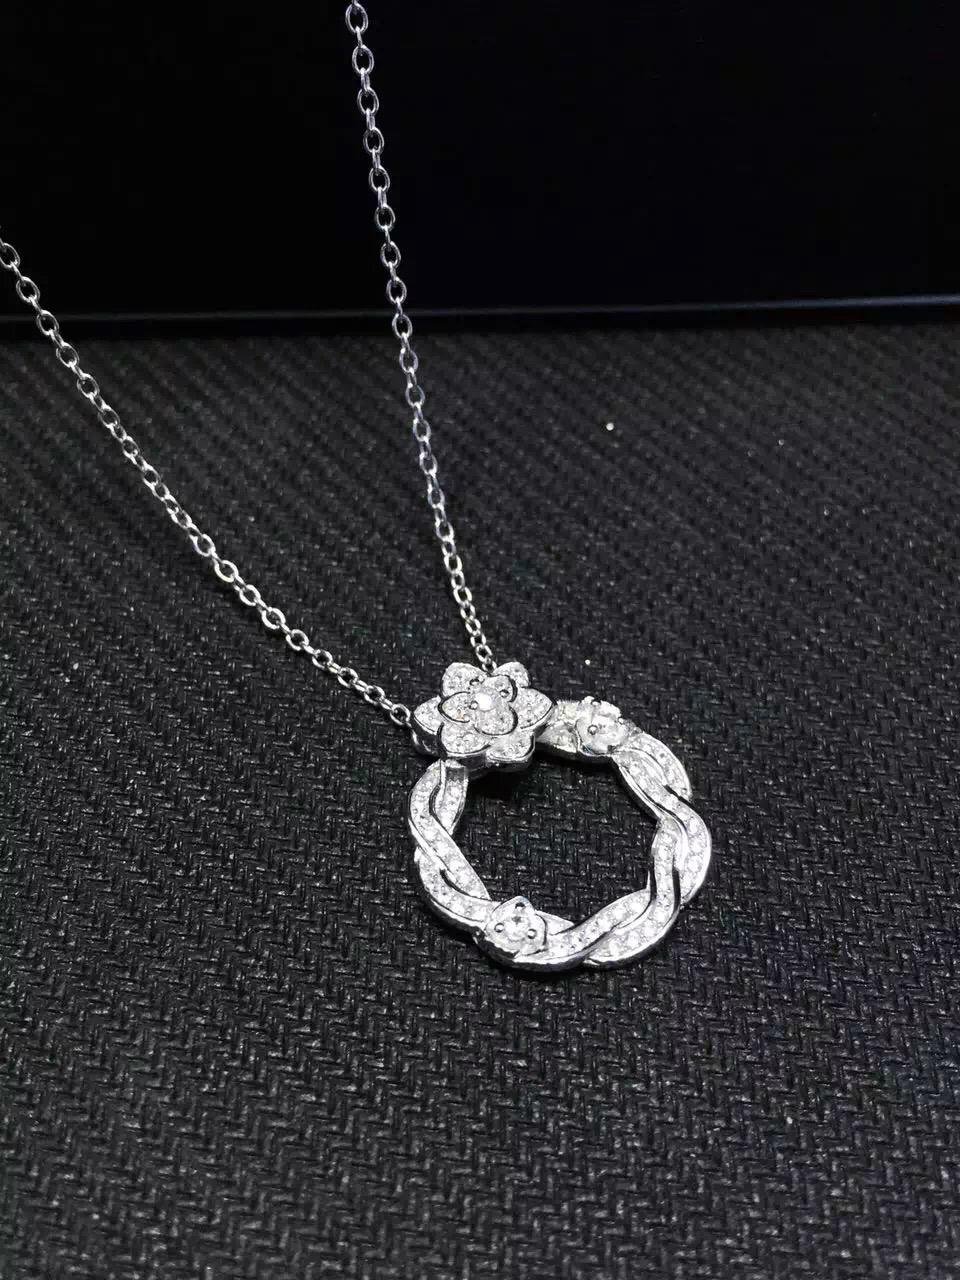 NEFFLY Nice Rose flower 925 Sterling Sliver necklace Women Girls For Party&Gift  5